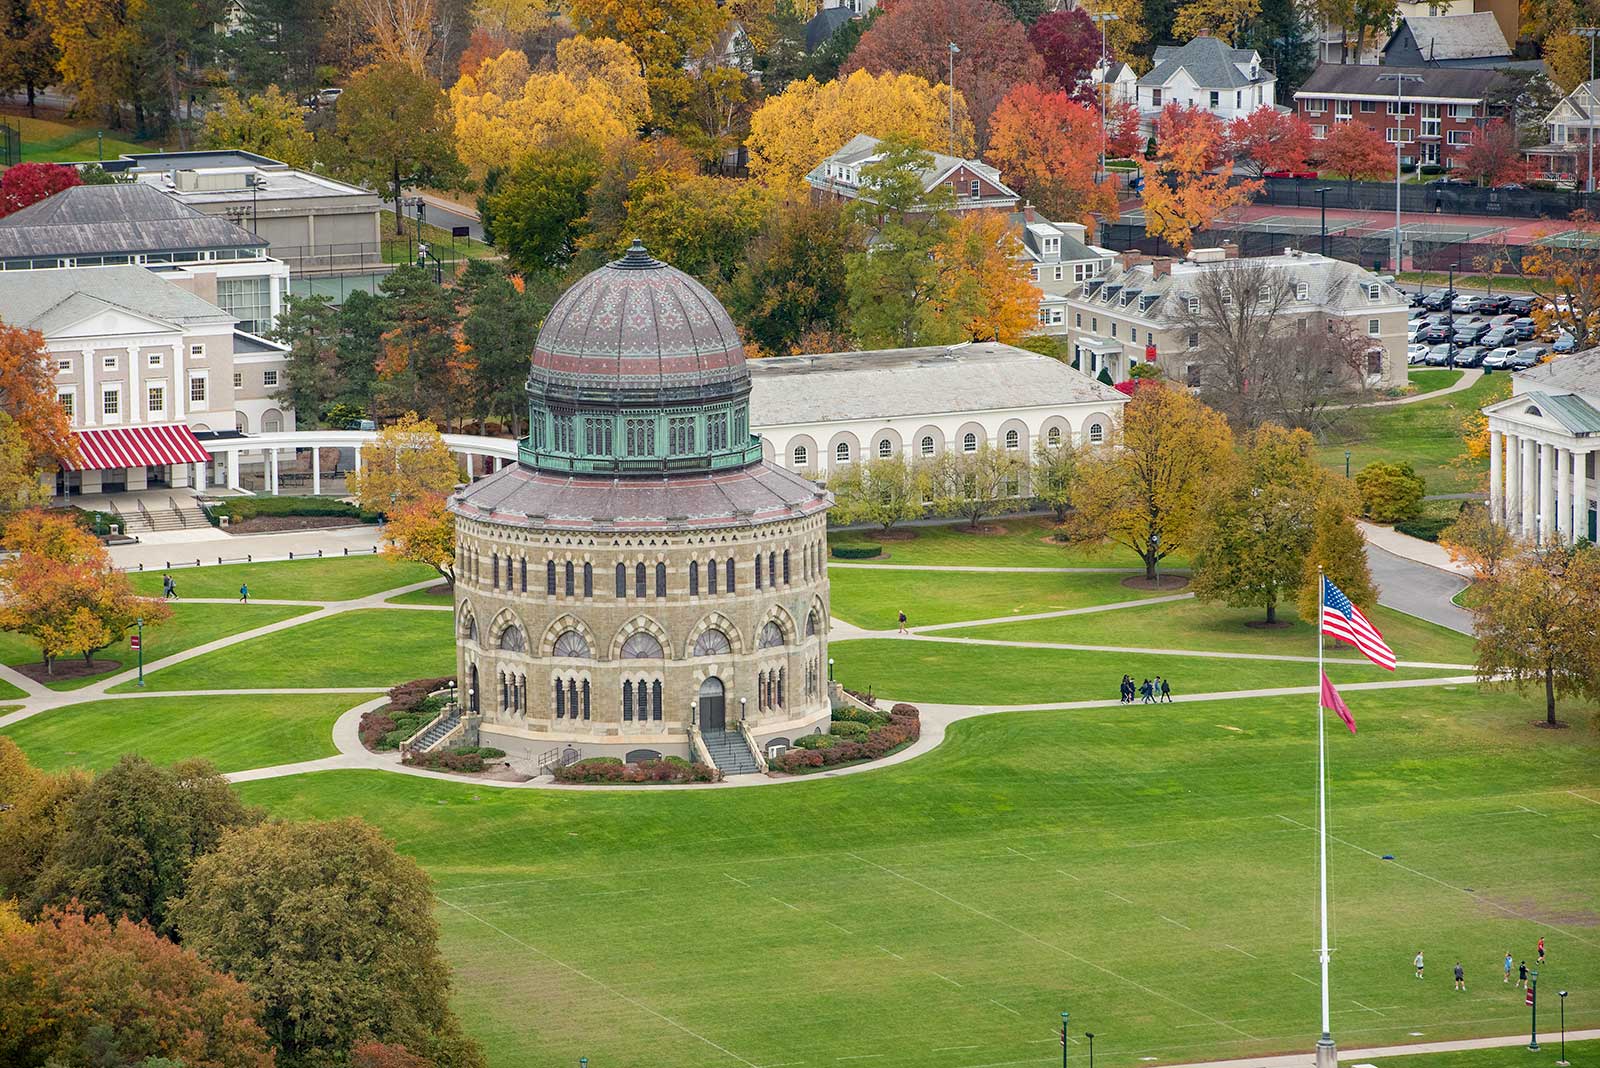 An aerial perspective of the Union College campus, prominently showcasing the Nott Memorial.